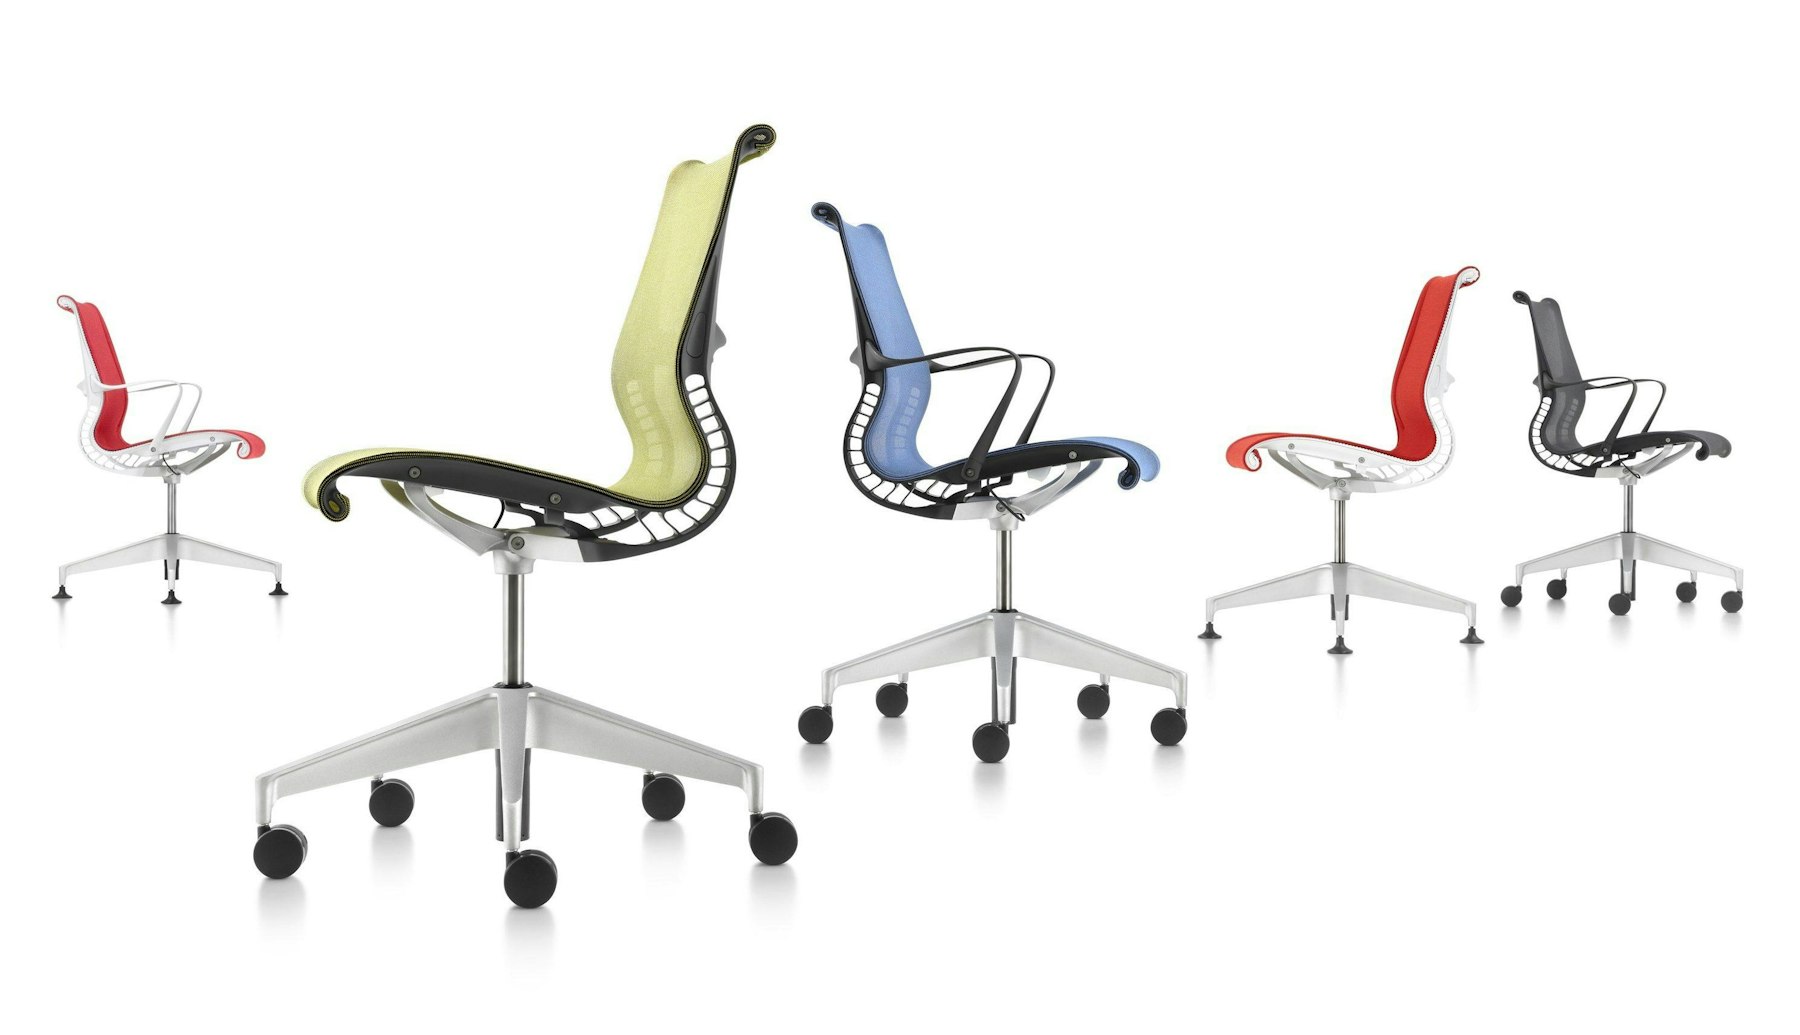 Herman Miller's New Stores Let Consumers Test-Drive High-End Office Chairs  - WSJ